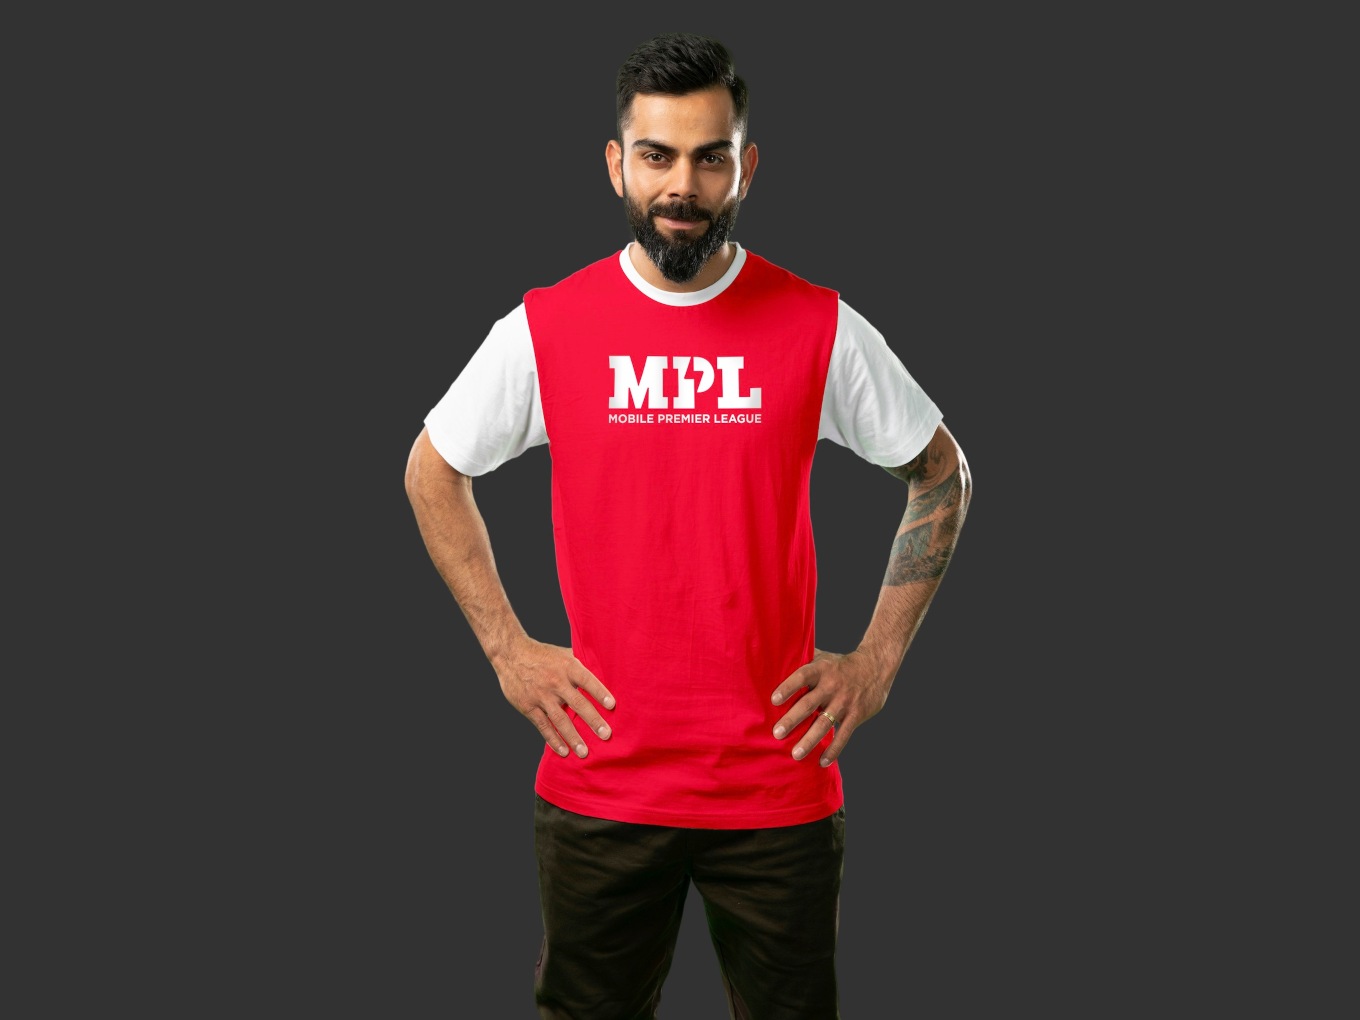 Does Virat Kohli’s Investment In MPL Breach Conflict Of Interest Rules?